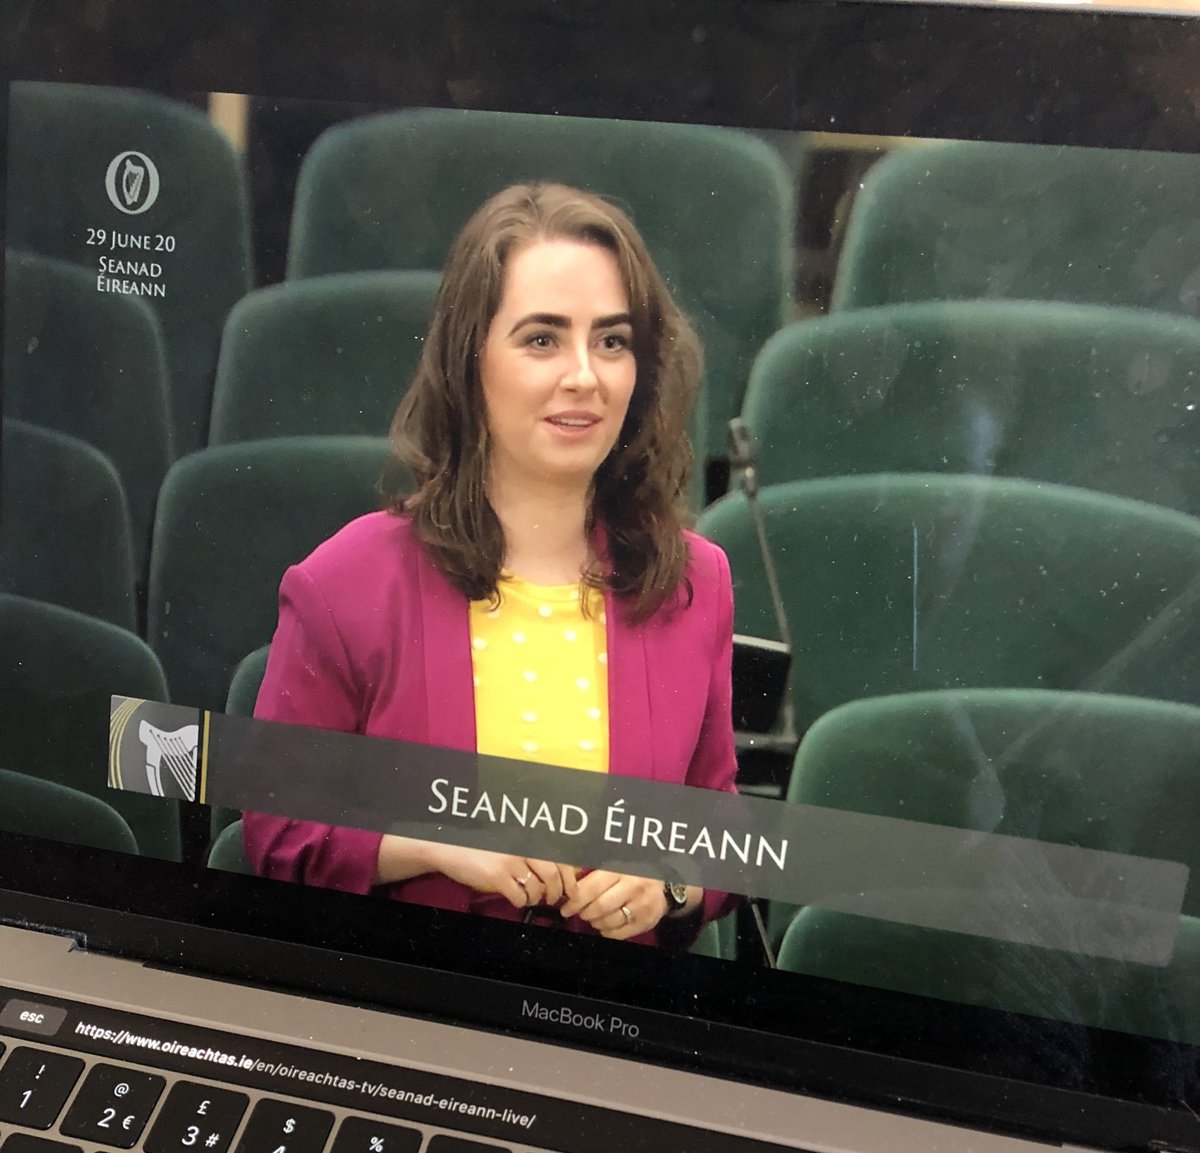 Brilliant maiden speech from @hoeyannie Delighted to hear her speak about the values important to her, her background in the student movement & how #SE2020 must do more to encourage the rise of diverse voices within our halls of power 🌹#SeanadEireann